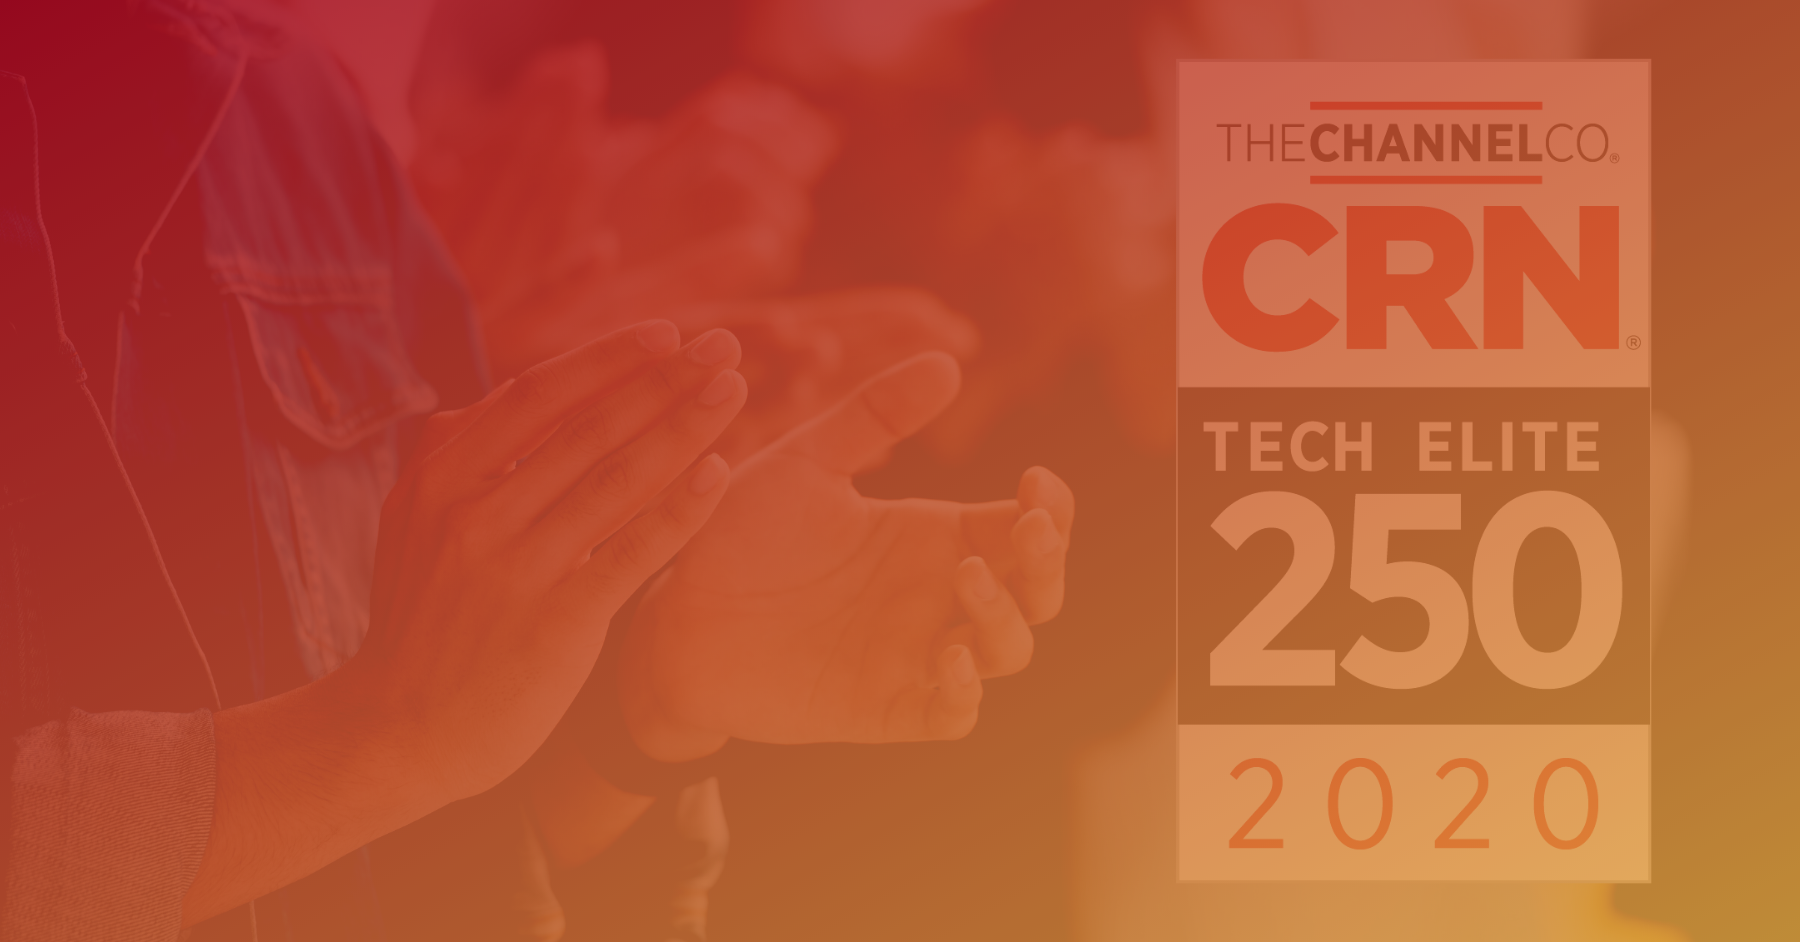 MicroAge Named to the 2020 Tech Elite 250 by CRN®